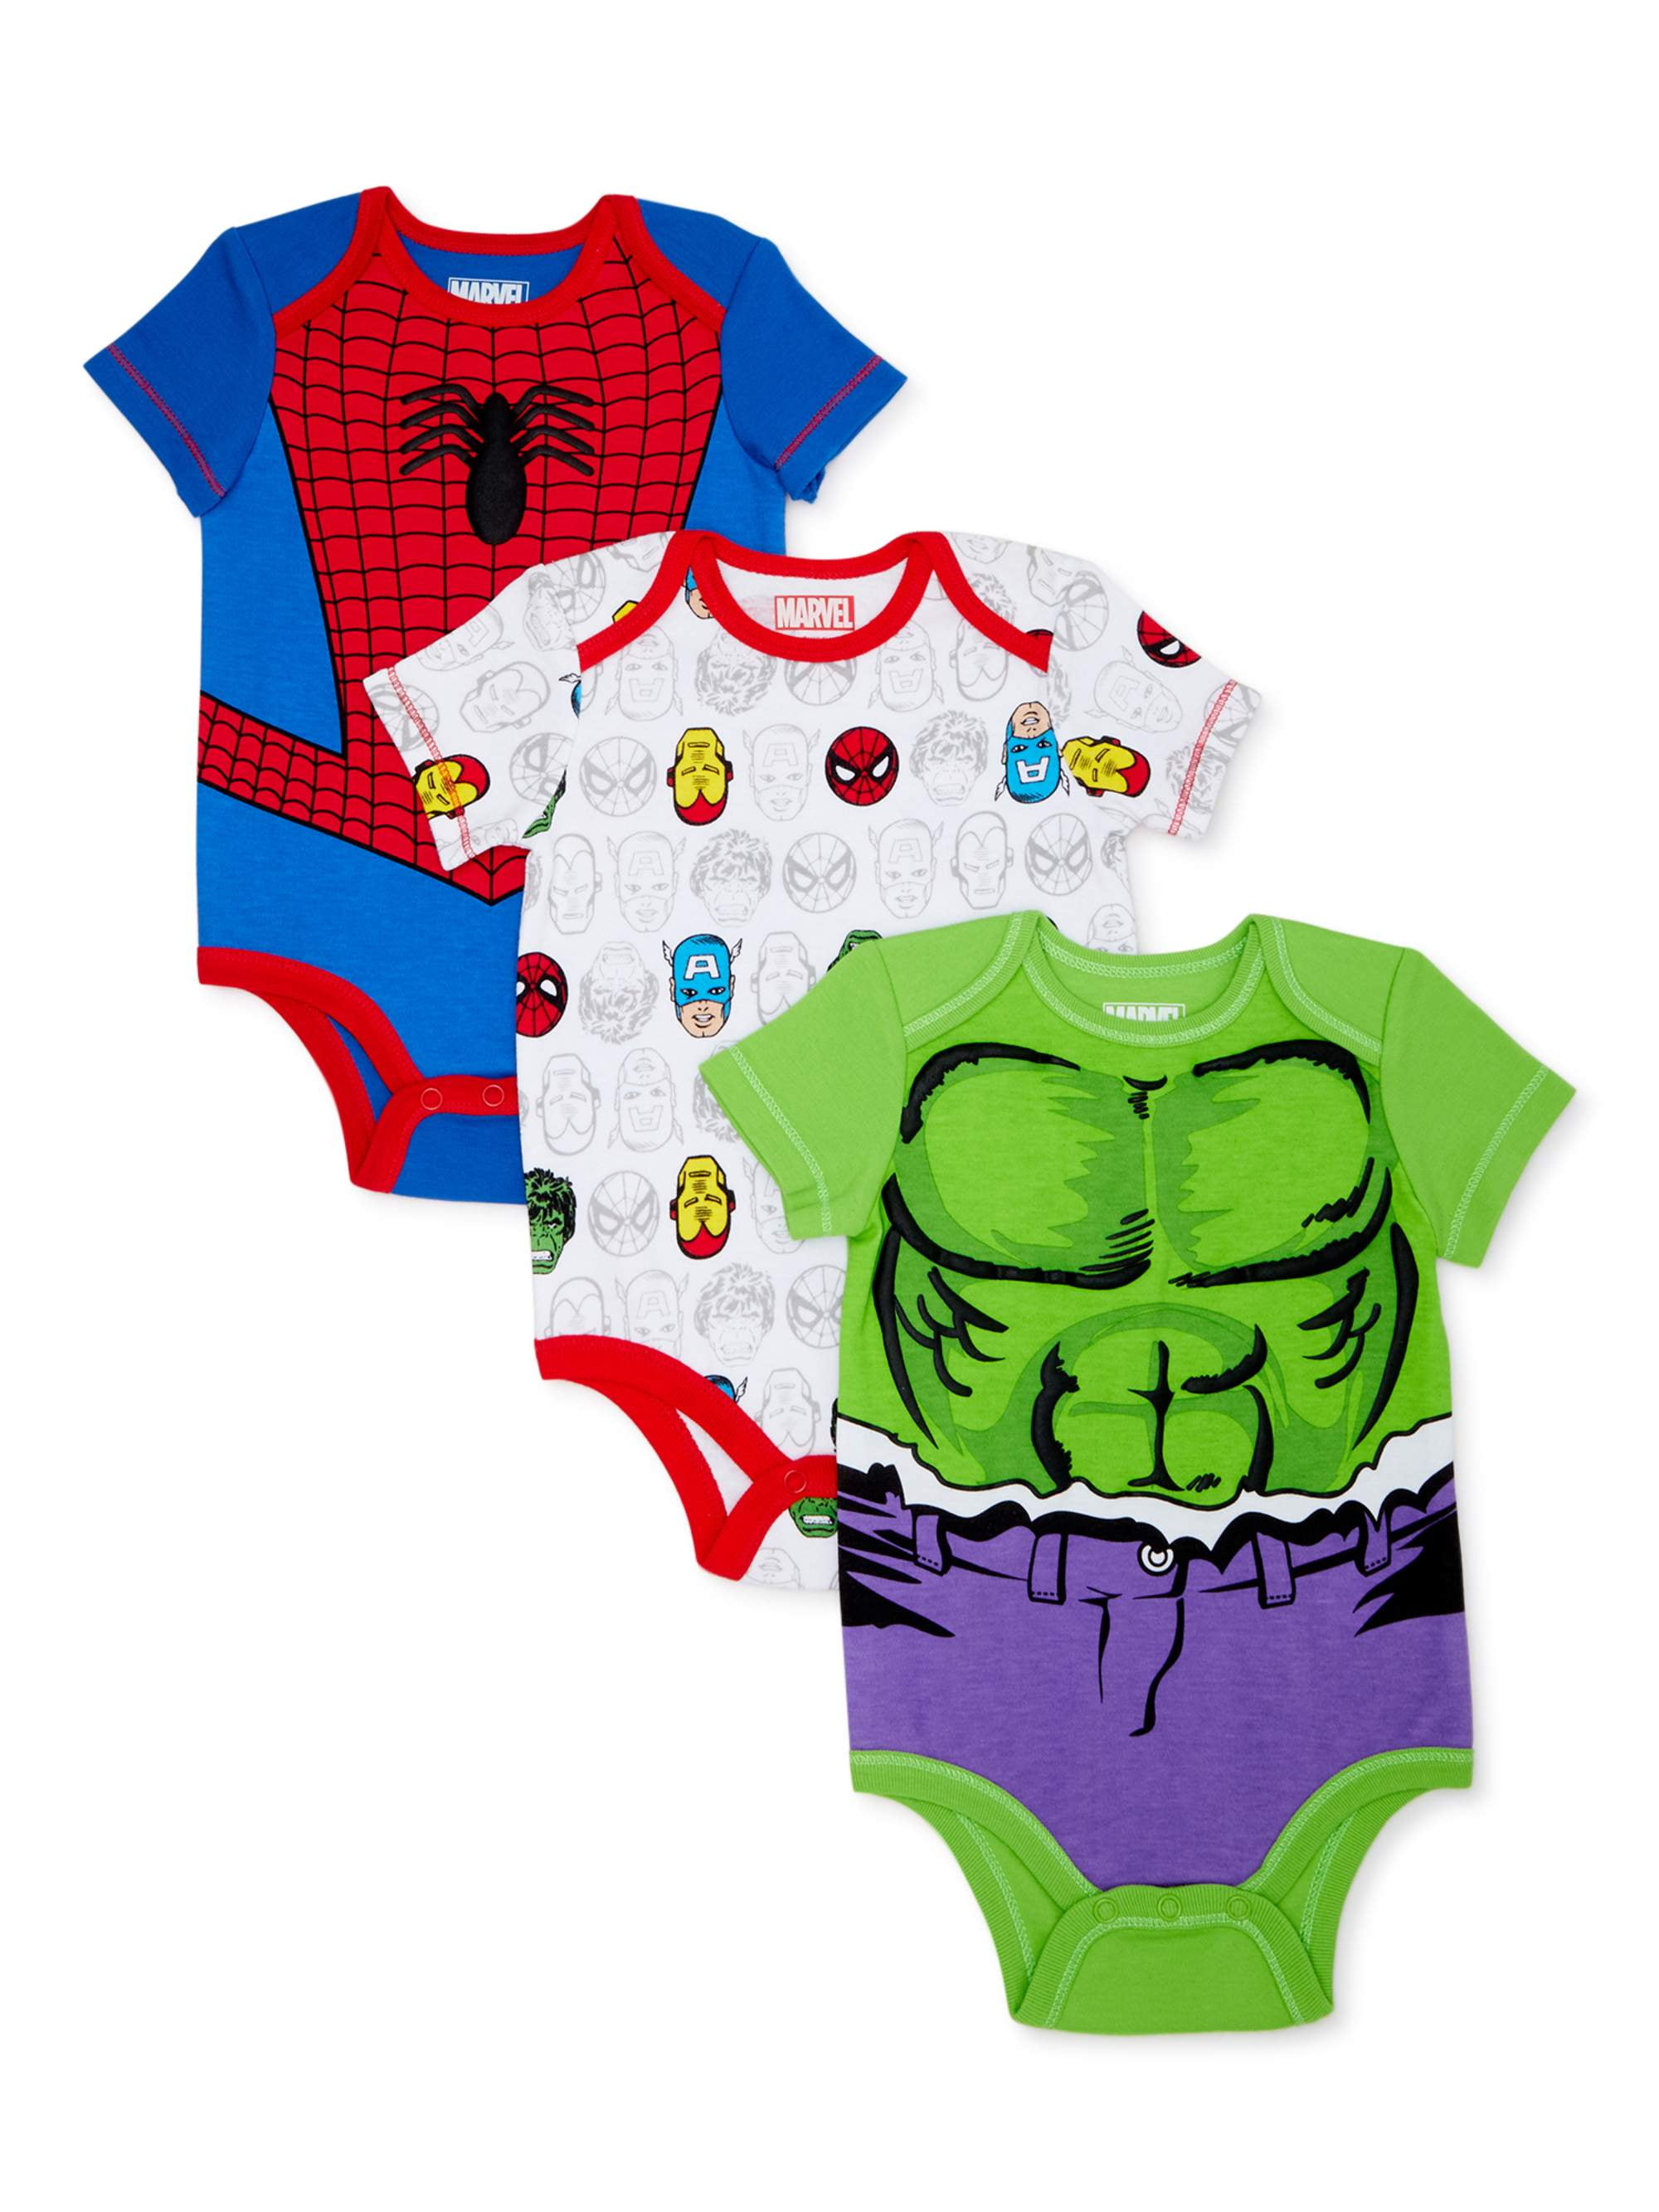 0-3 3-6,12 Months Avengers Baby Boys 2-Pack Bodysuits Infant One Piece NB 